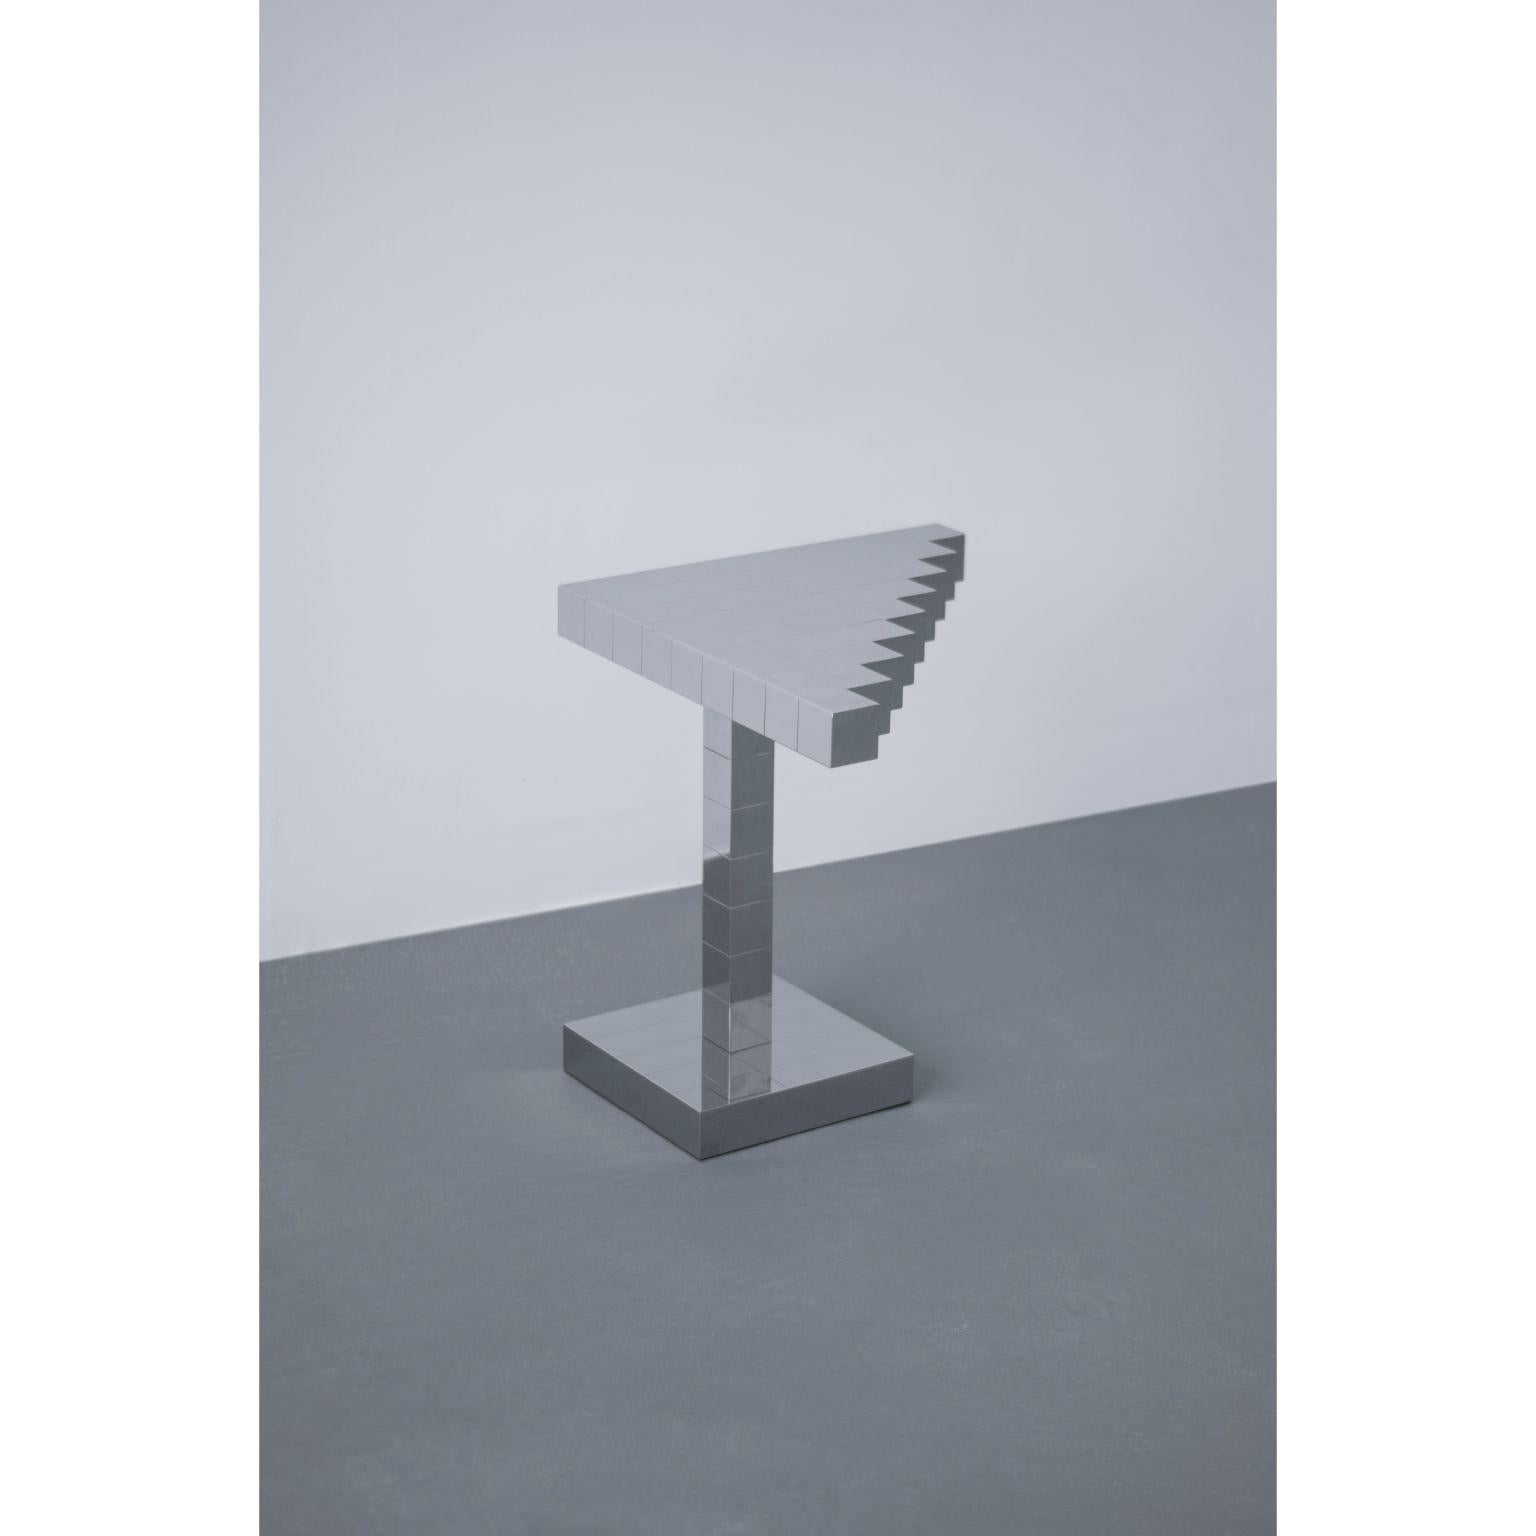 Black Ocean 1 Stool by the Shaw 10